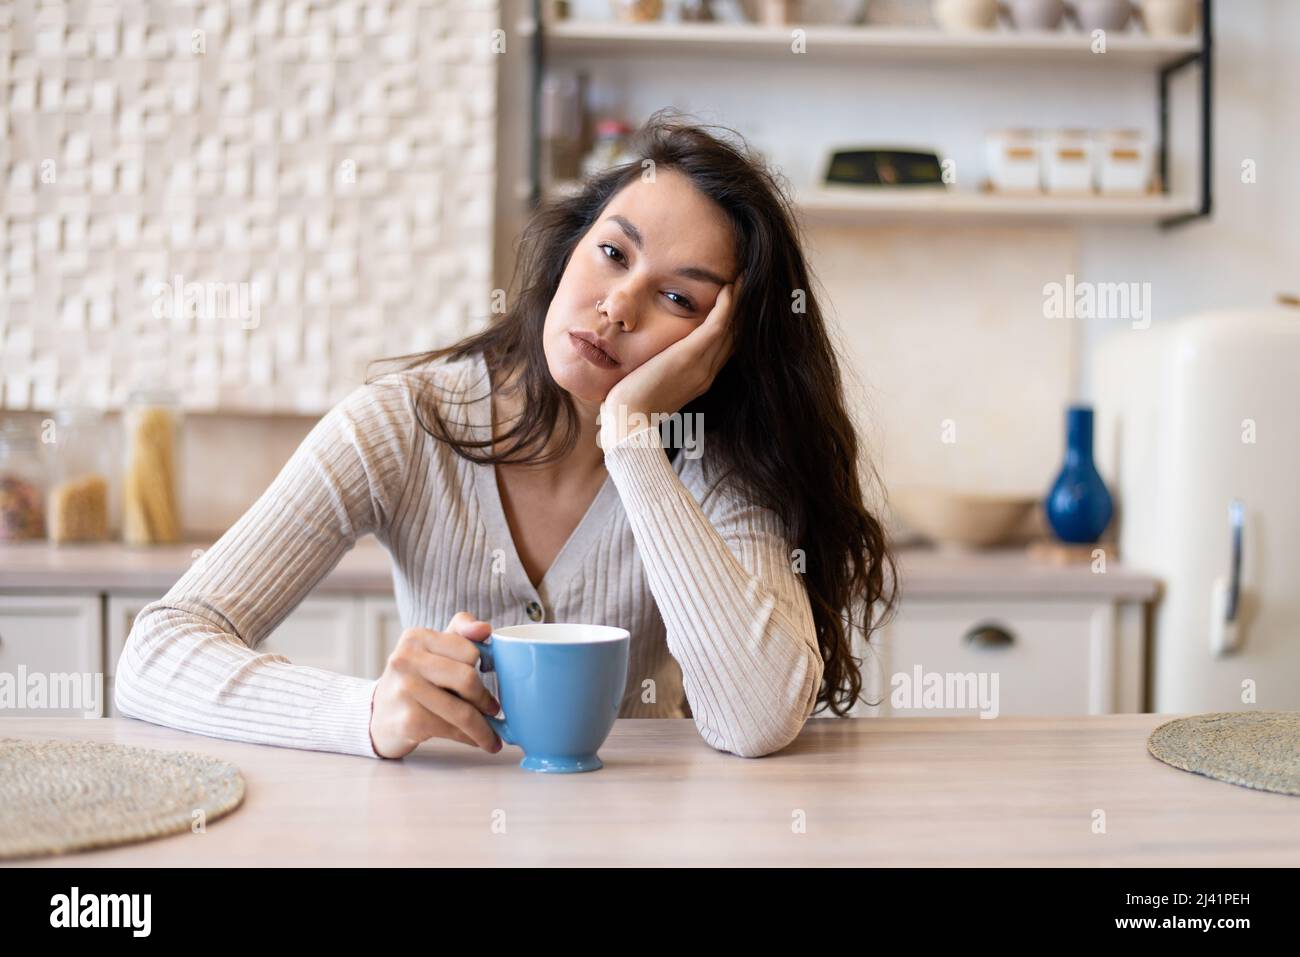 Tired and sleepy woman drinking coffee in the morning, feeling exhausted, suffering from insomnia, sitting in kitchen Stock Photo